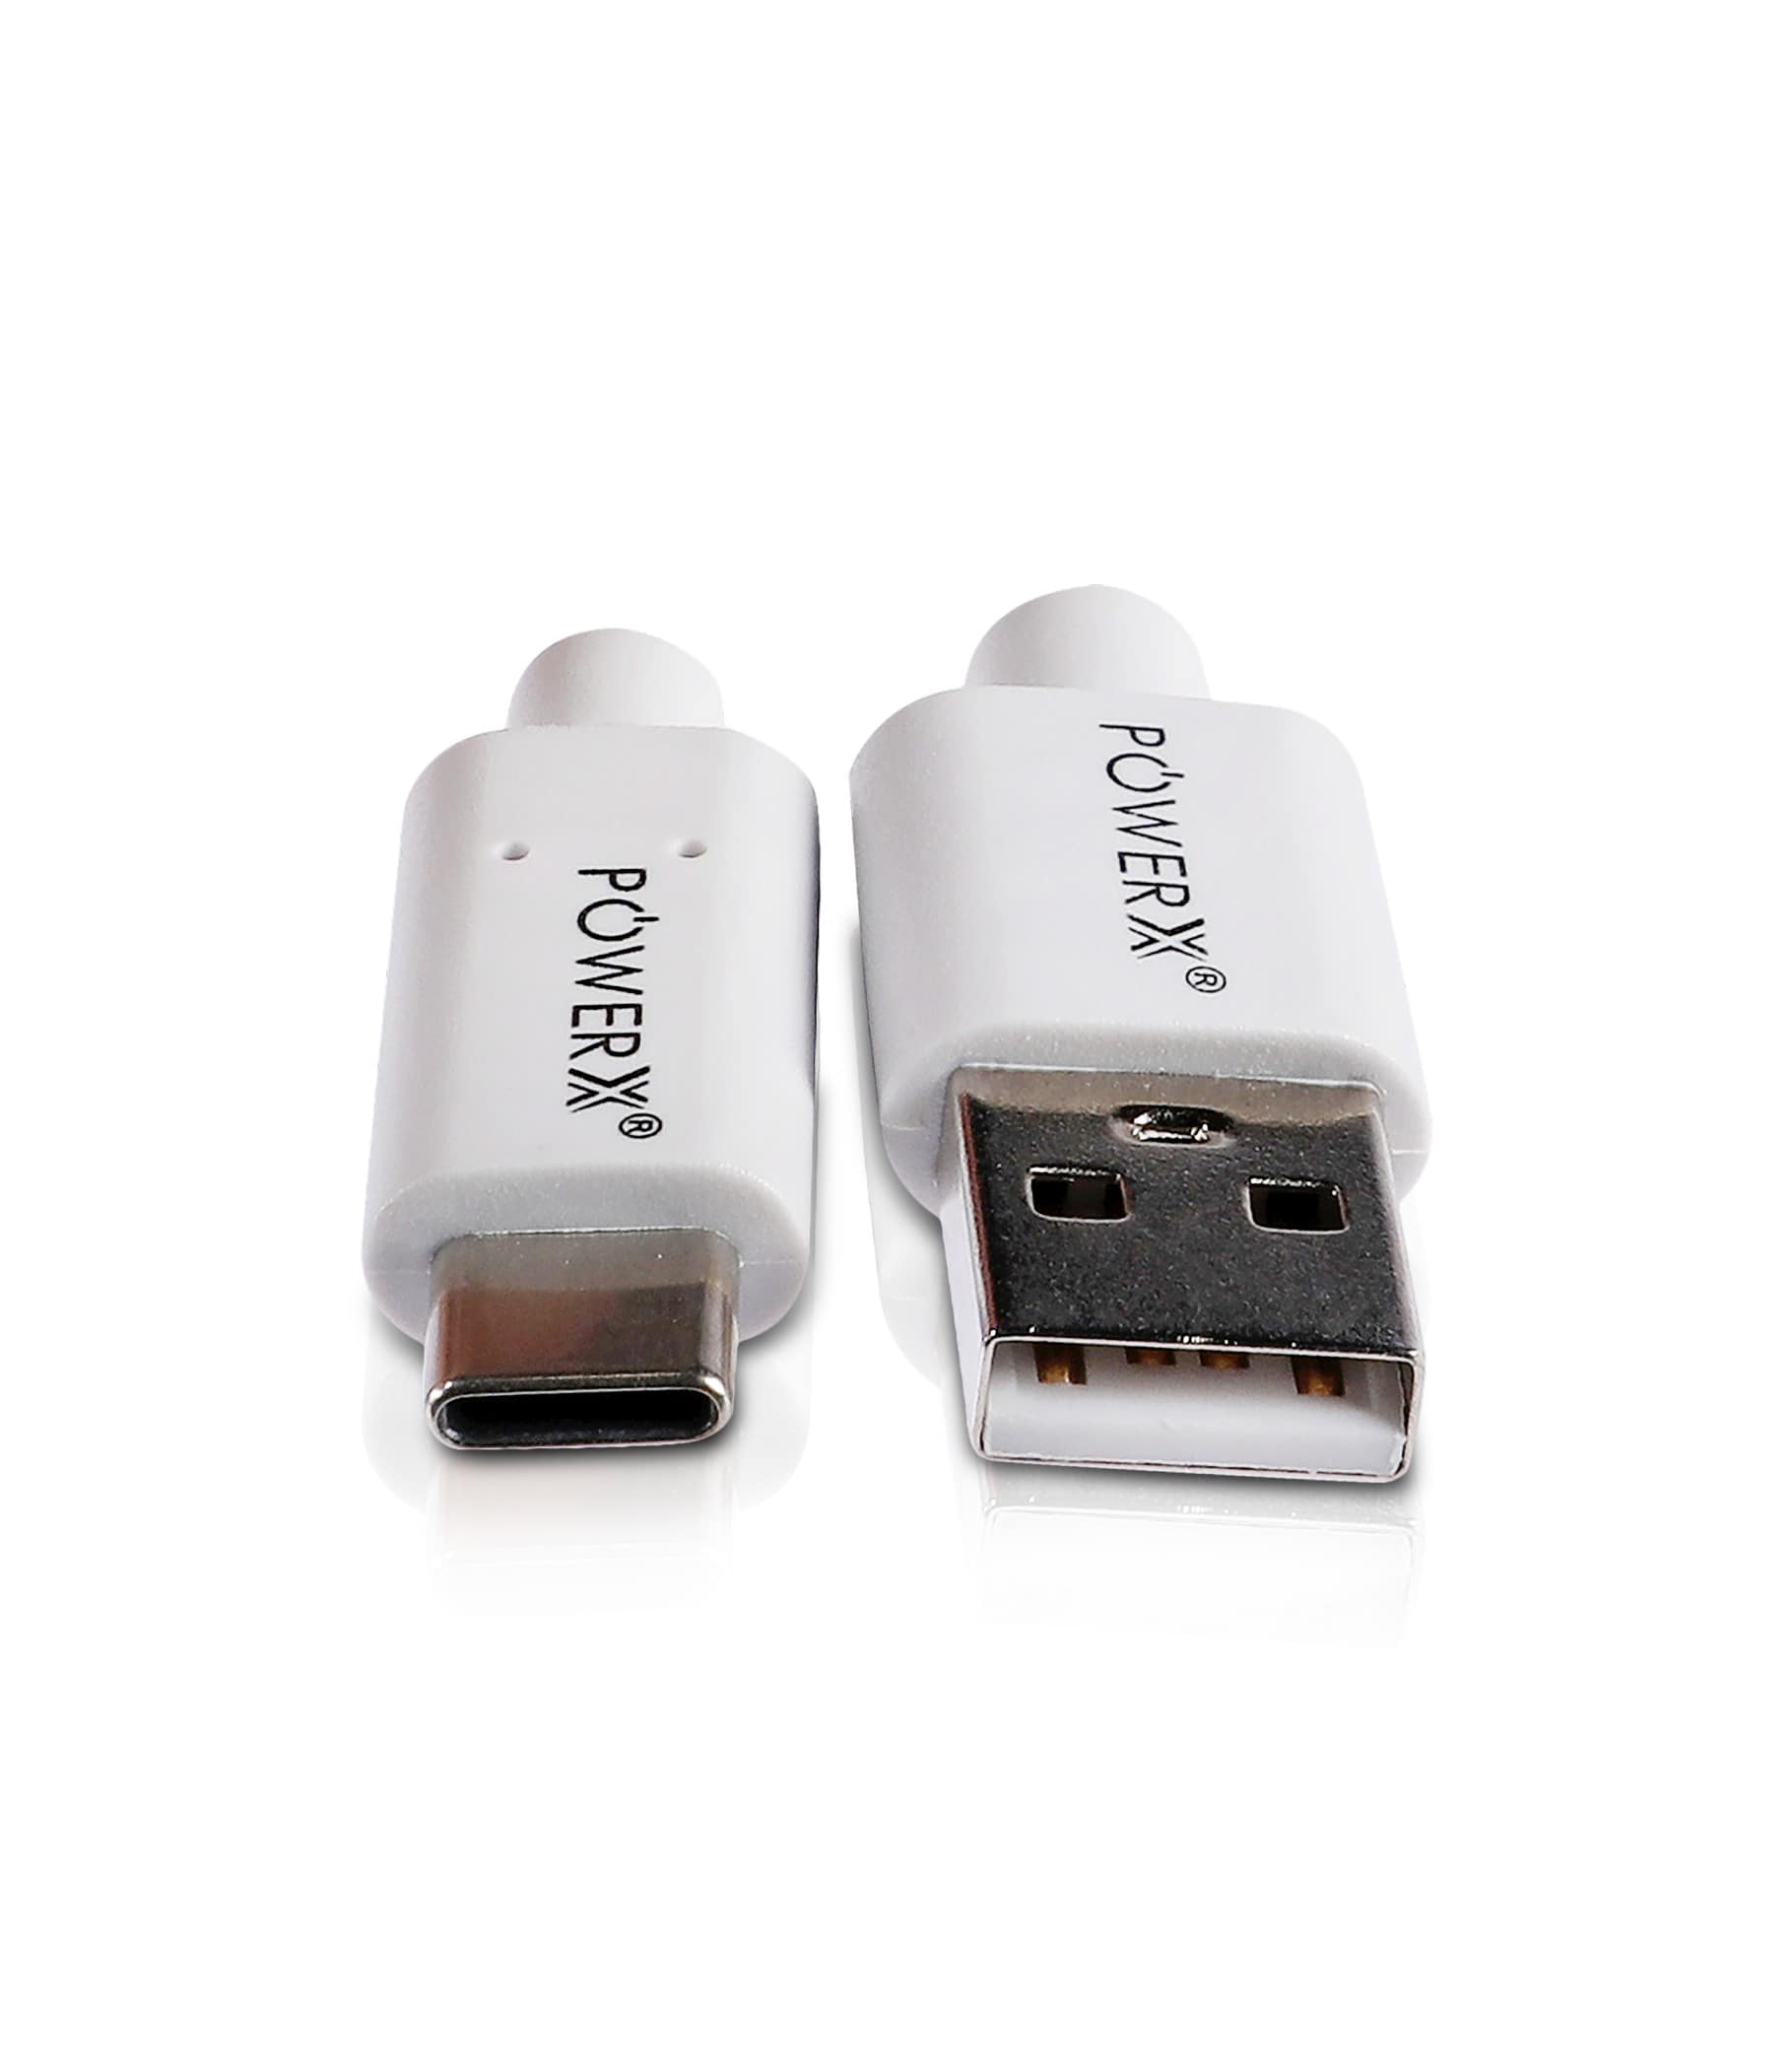 C TO USB PORT, C MALE TO USB FEMALE CONNECTOR